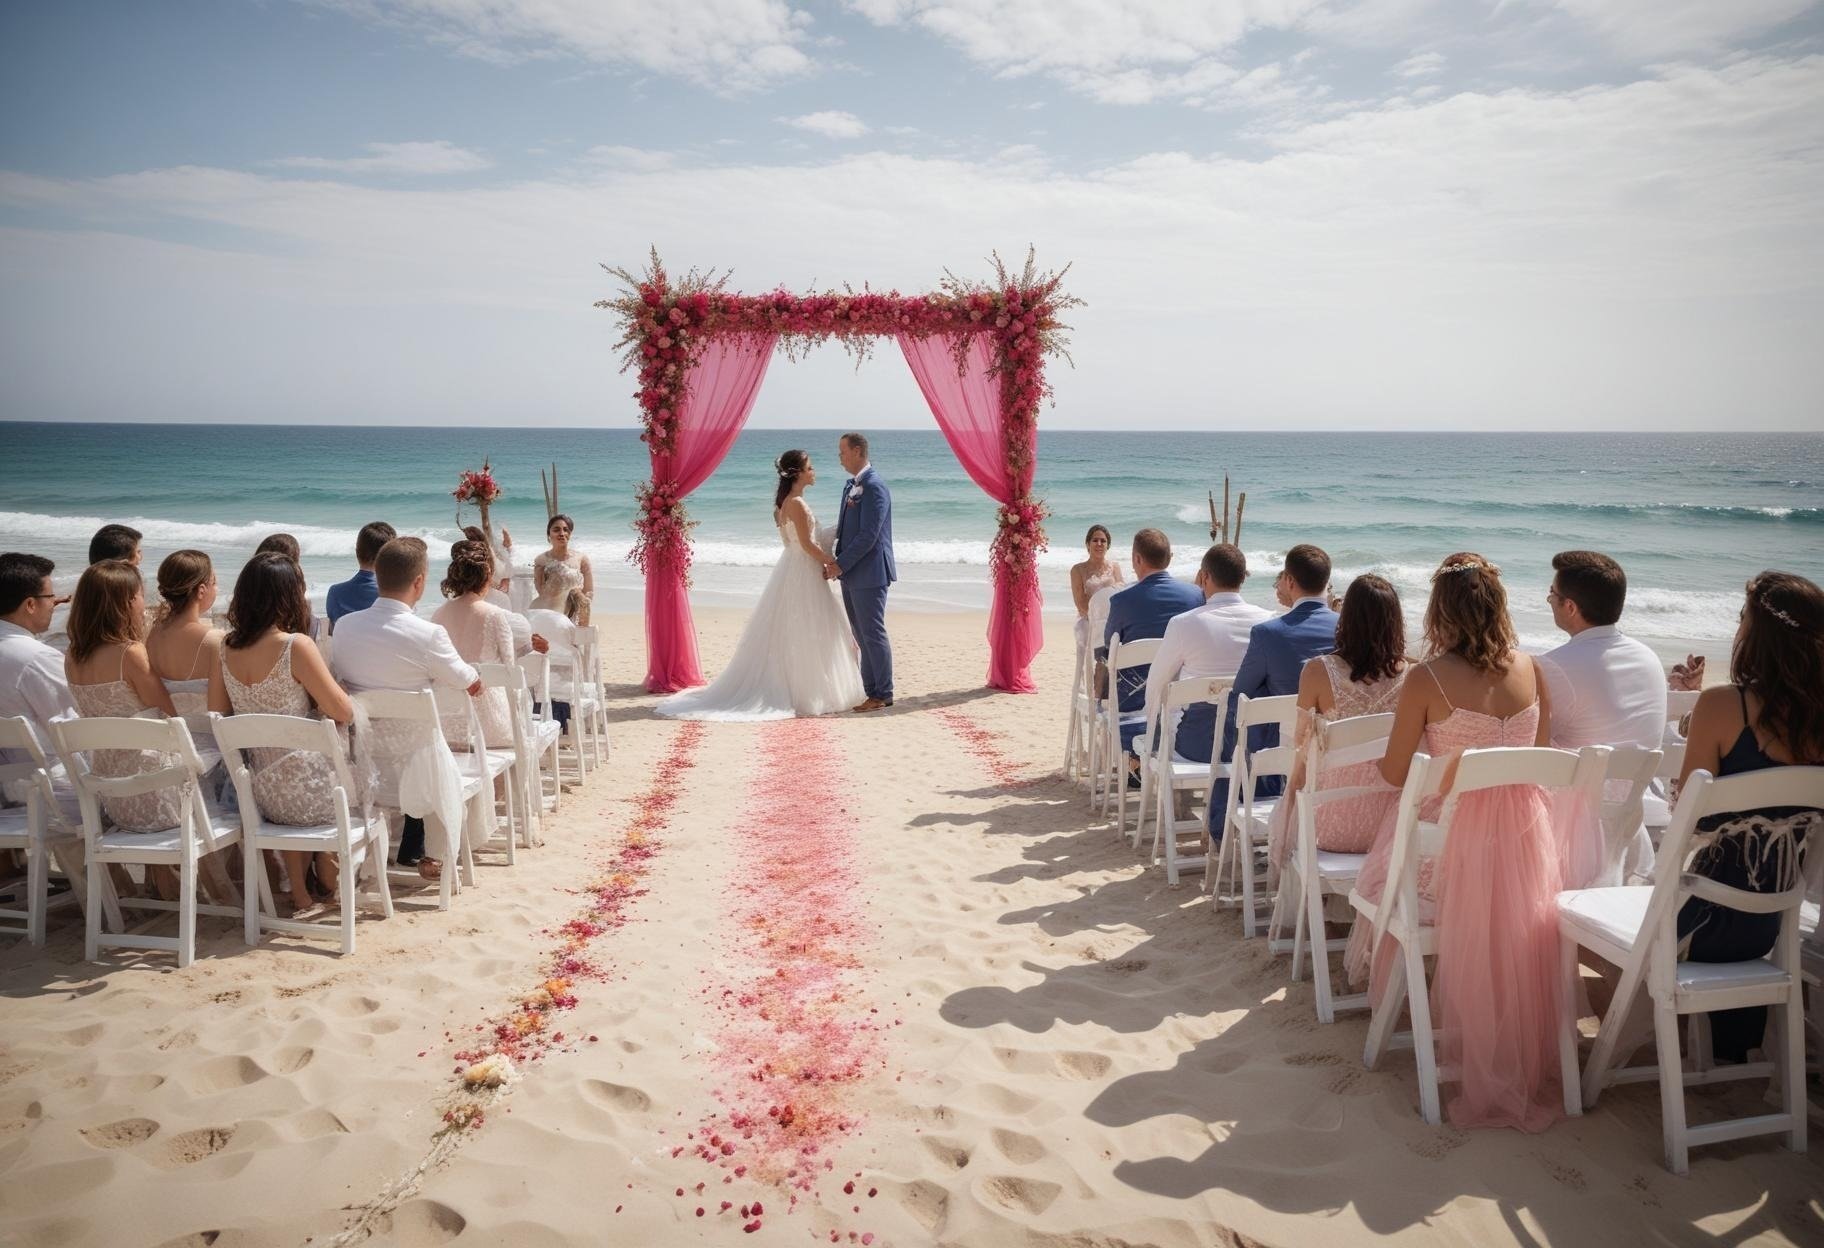 a bride and groom are getting married on the beach under a pink canopy